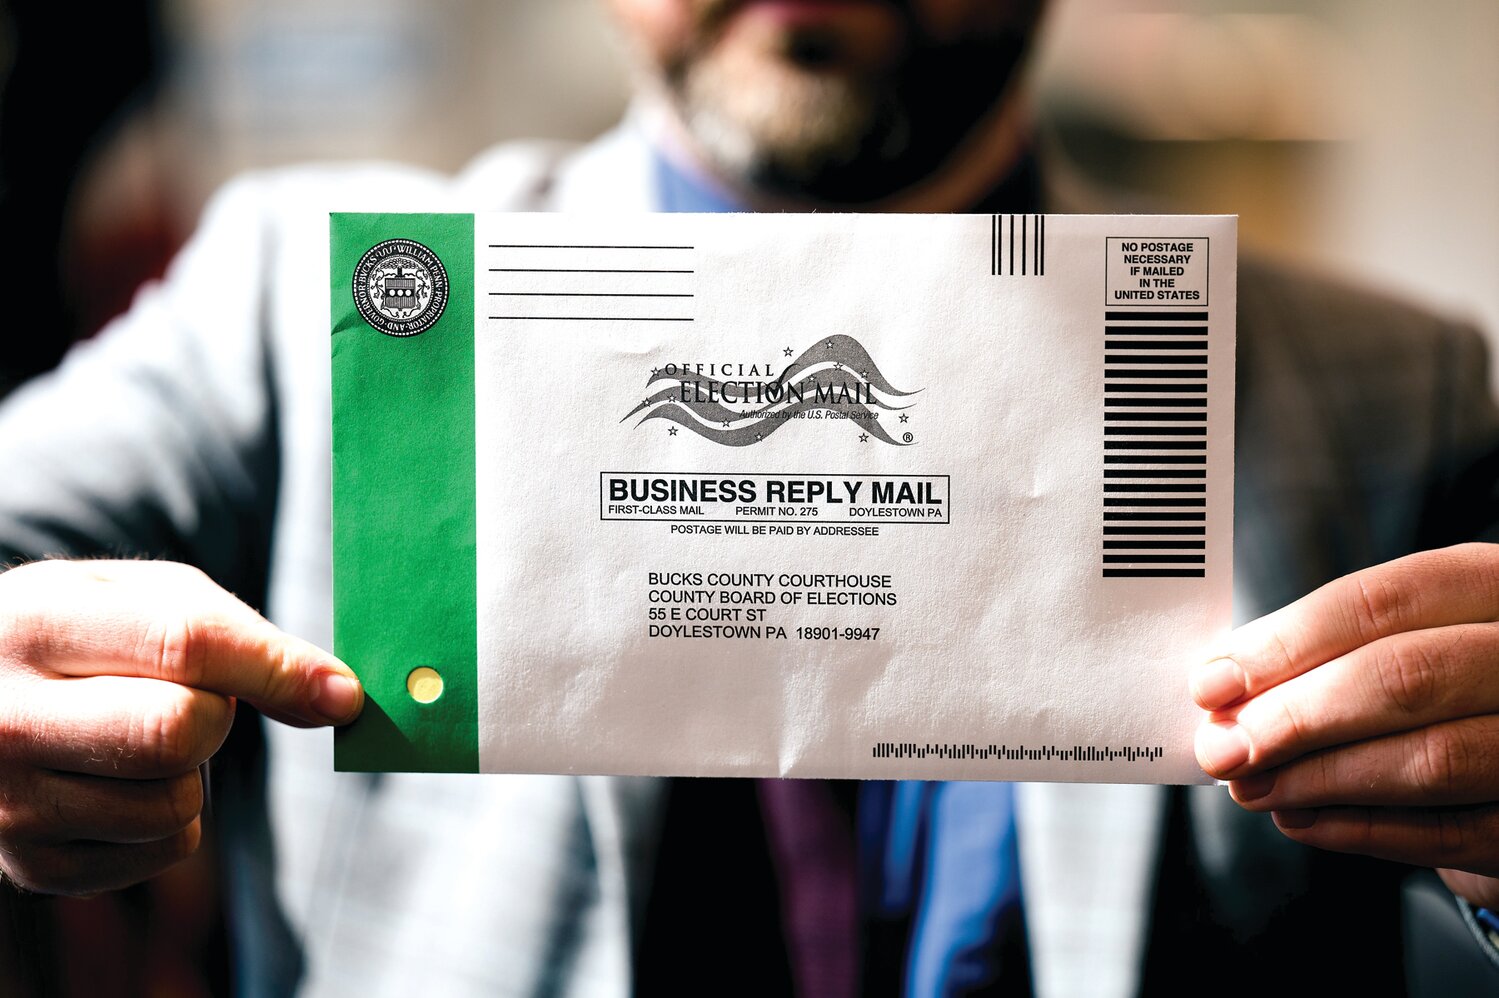 Bucks County has made some changes to this year's mail-in and absentee ballots in order to reduce the number of rejected ballots. A small hole will show the now-yellow secrecy ballot.